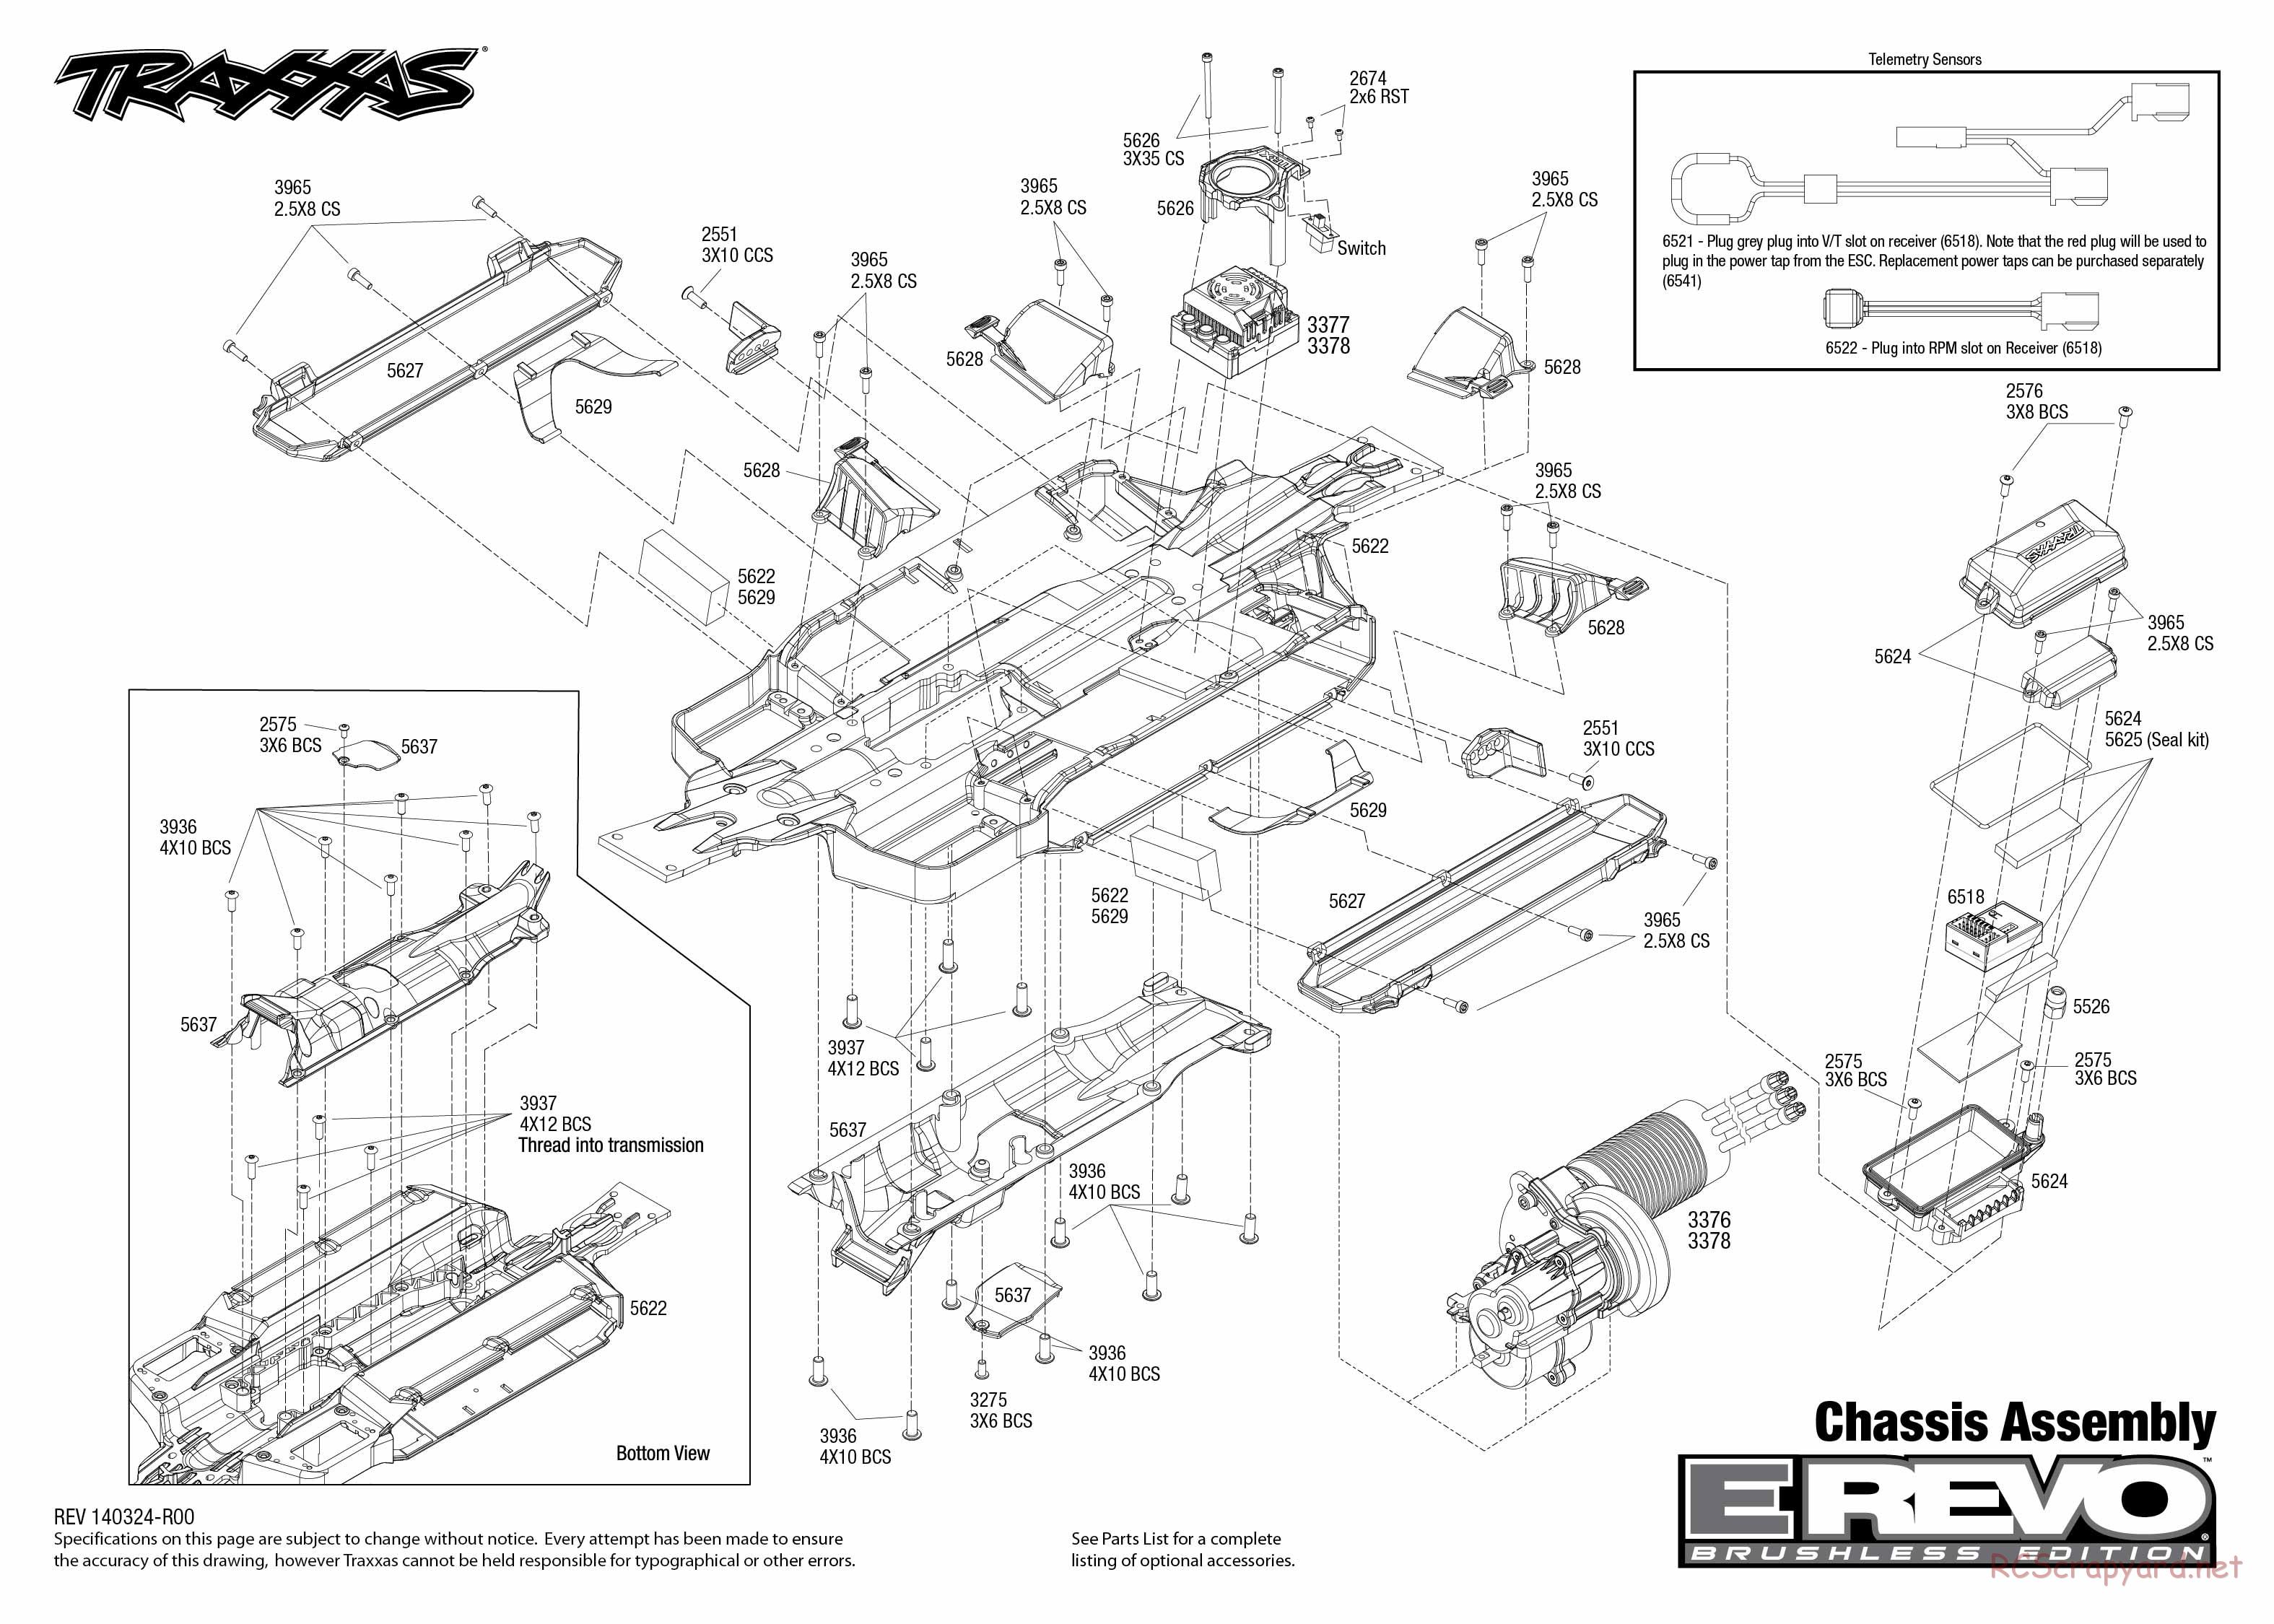 Traxxas - E-Revo Brushless (2014) - Exploded Views - Page 1